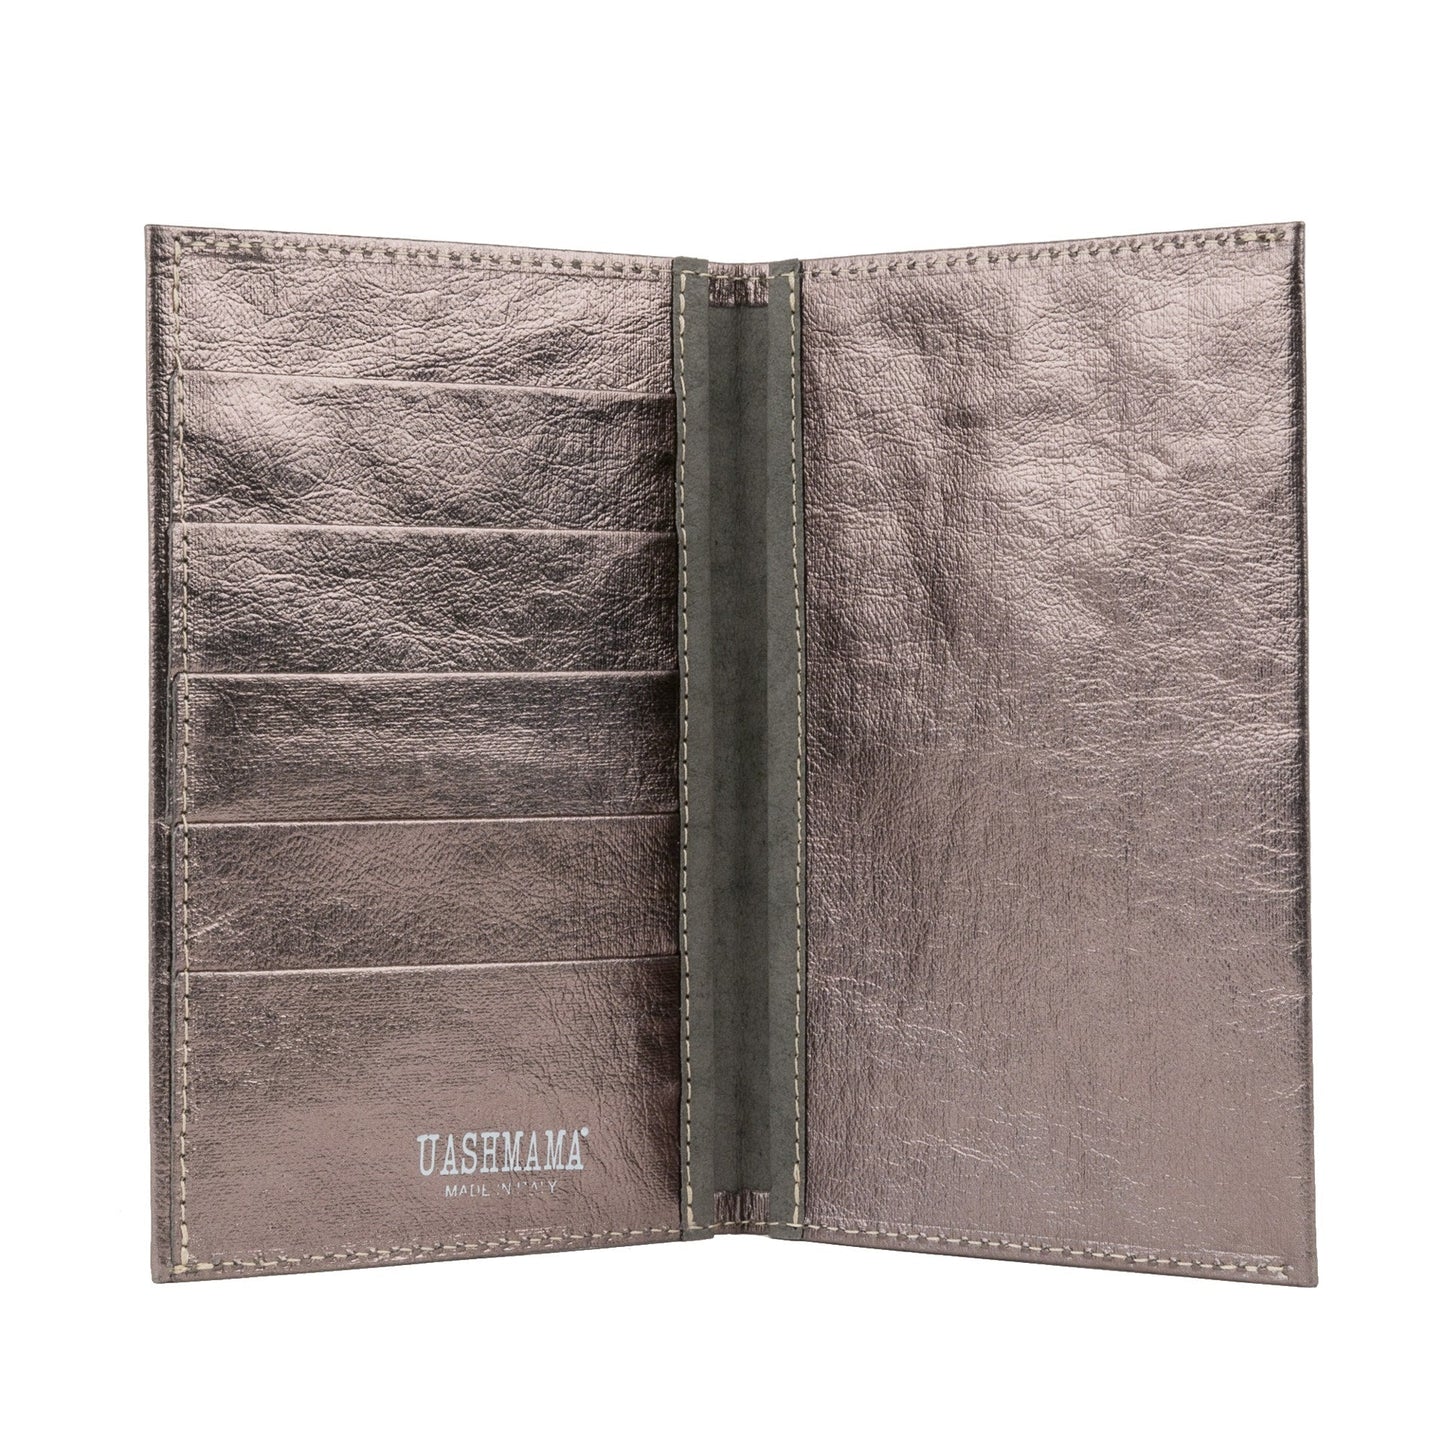 A washable paper large wallet is shown open. On the left hand side are 5 credit card slots. On the right hand side is one large pocket. The UASHMAMA logo is shown on the bottom left of the wallet. The colour of the wallet is dark grey metallic.